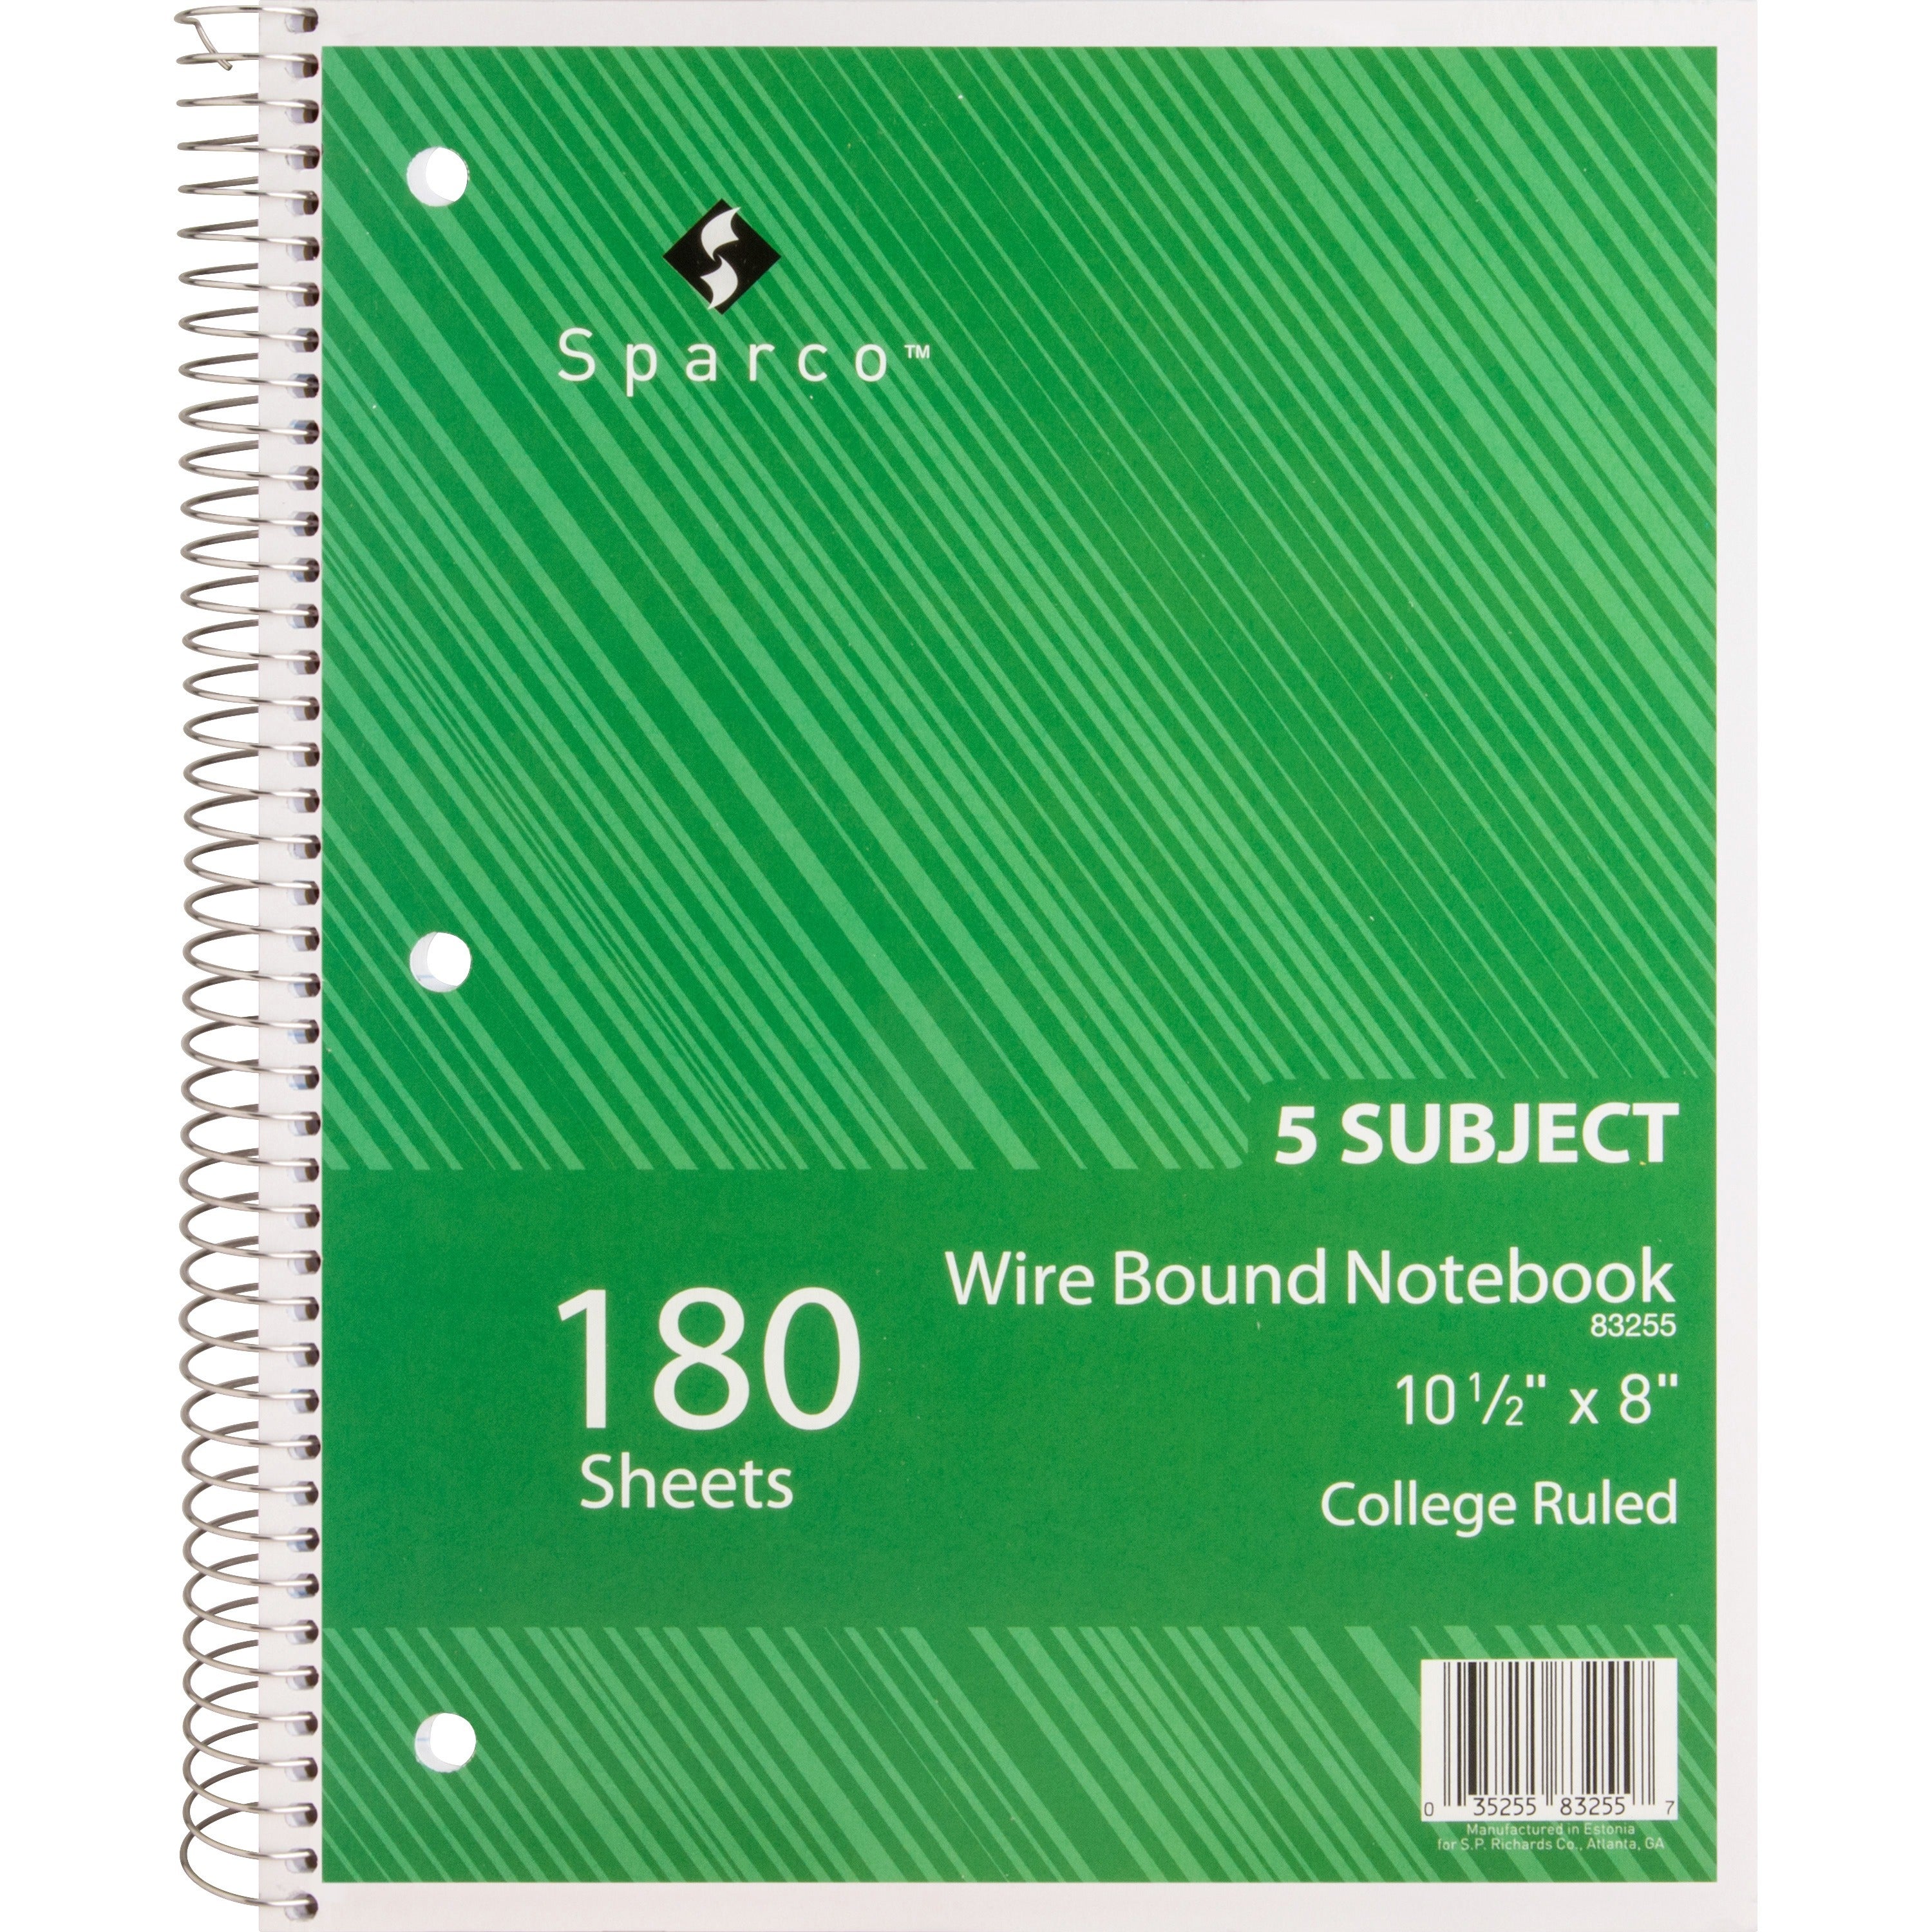 Sparco Wirebound College Ruled Notebooks - 180 Sheets - Wire Bound - College Ruled - Unruled Margin - 8" x 10 1/2" - Assorted Paper - AssortedChipboard Cover - Resist Bleed-through, Subject, Stiff-back, Stiff-cover - 1 Each - 